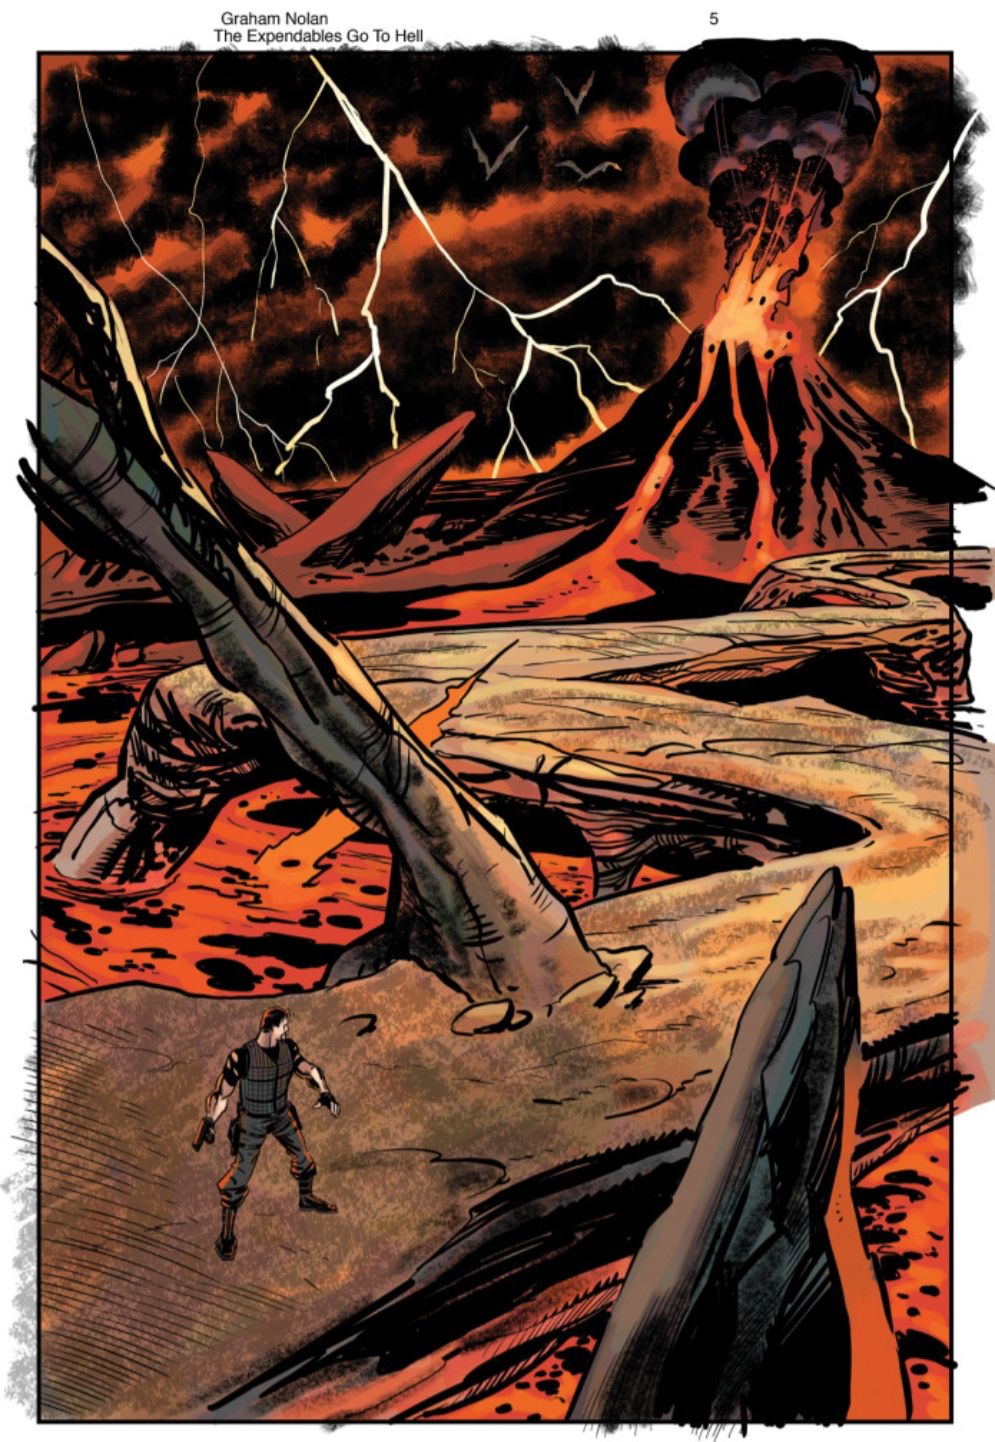 The Expendables Go To Hell Graphic Novel Page 5